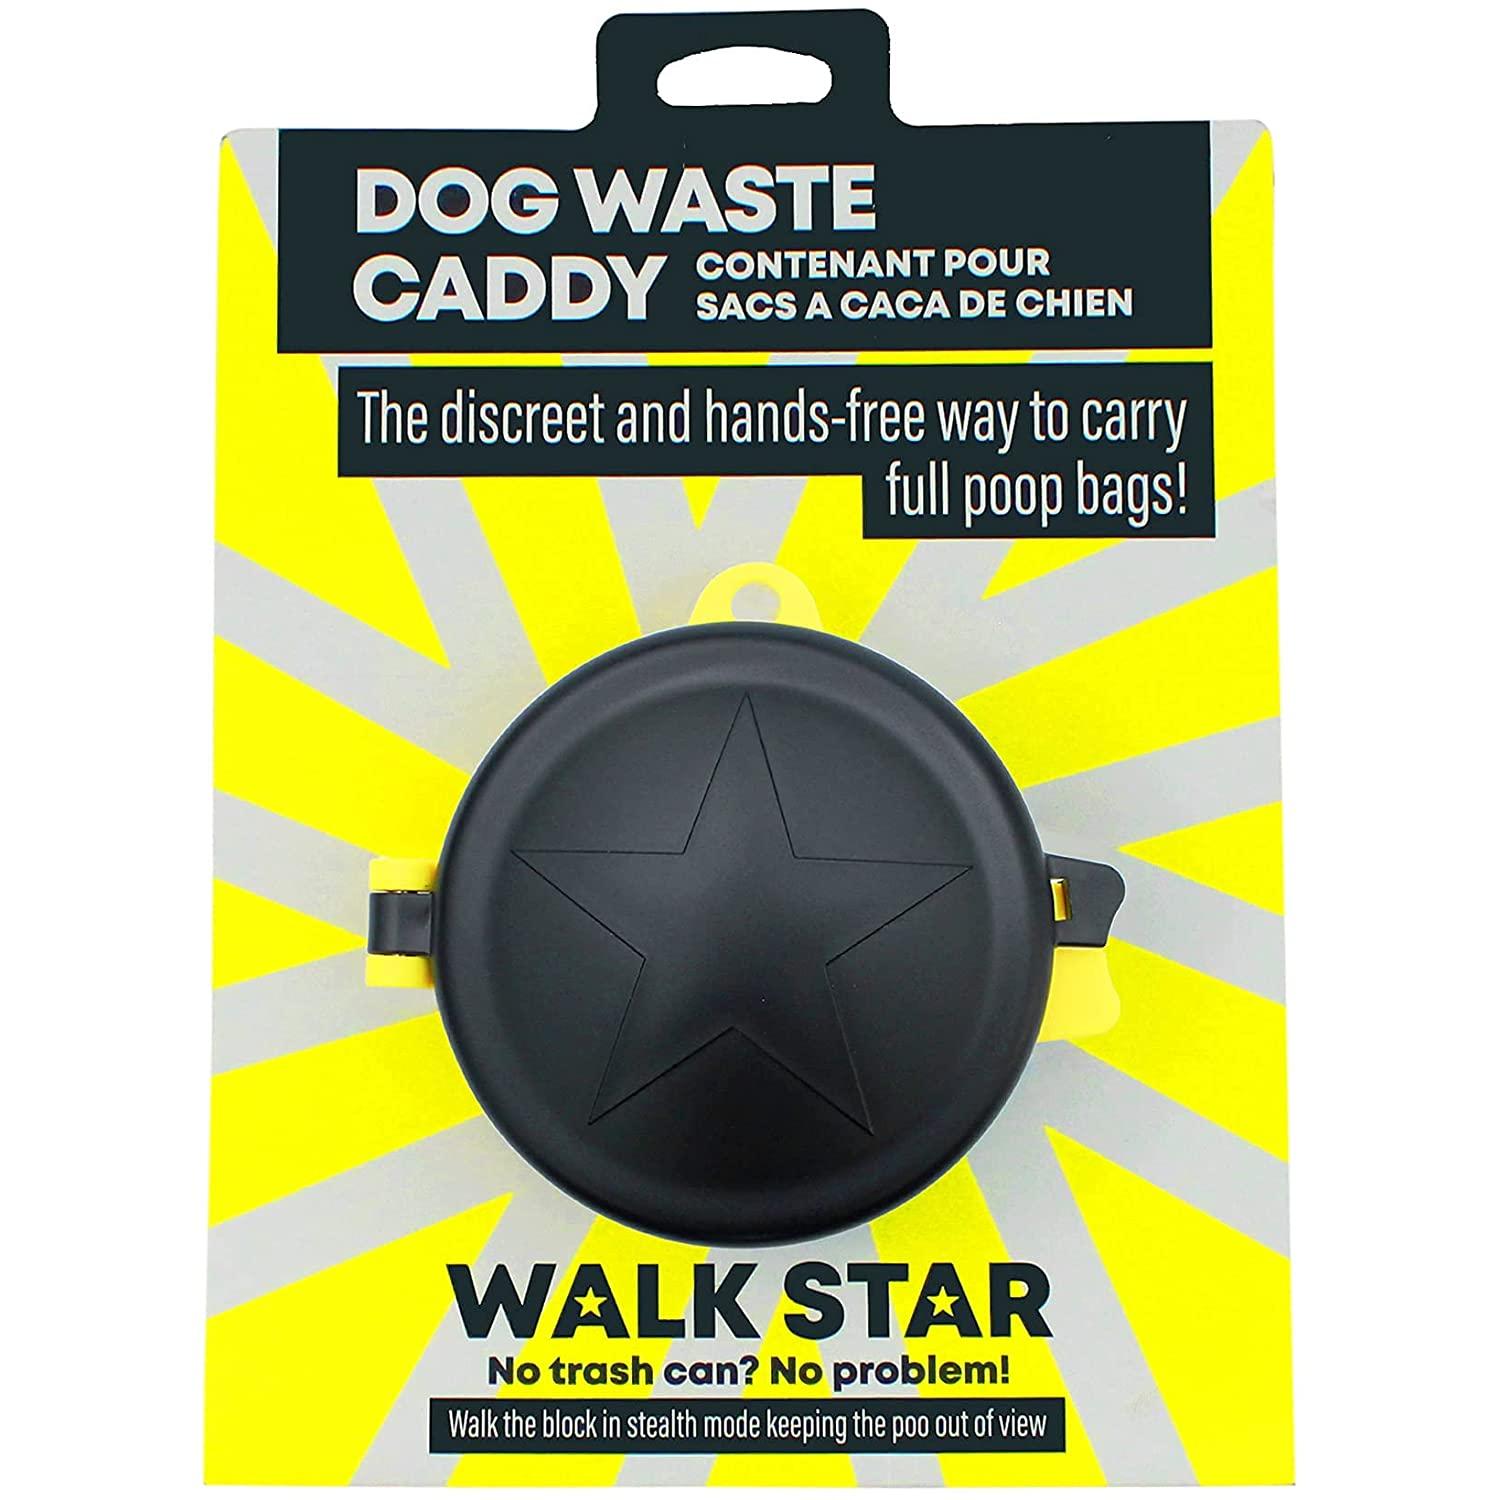 Walk Star Expandable Dog Waste Caddy, Full Poop Bag Carrier Holds Smelly Poop Bags Locking in Odours and Germs